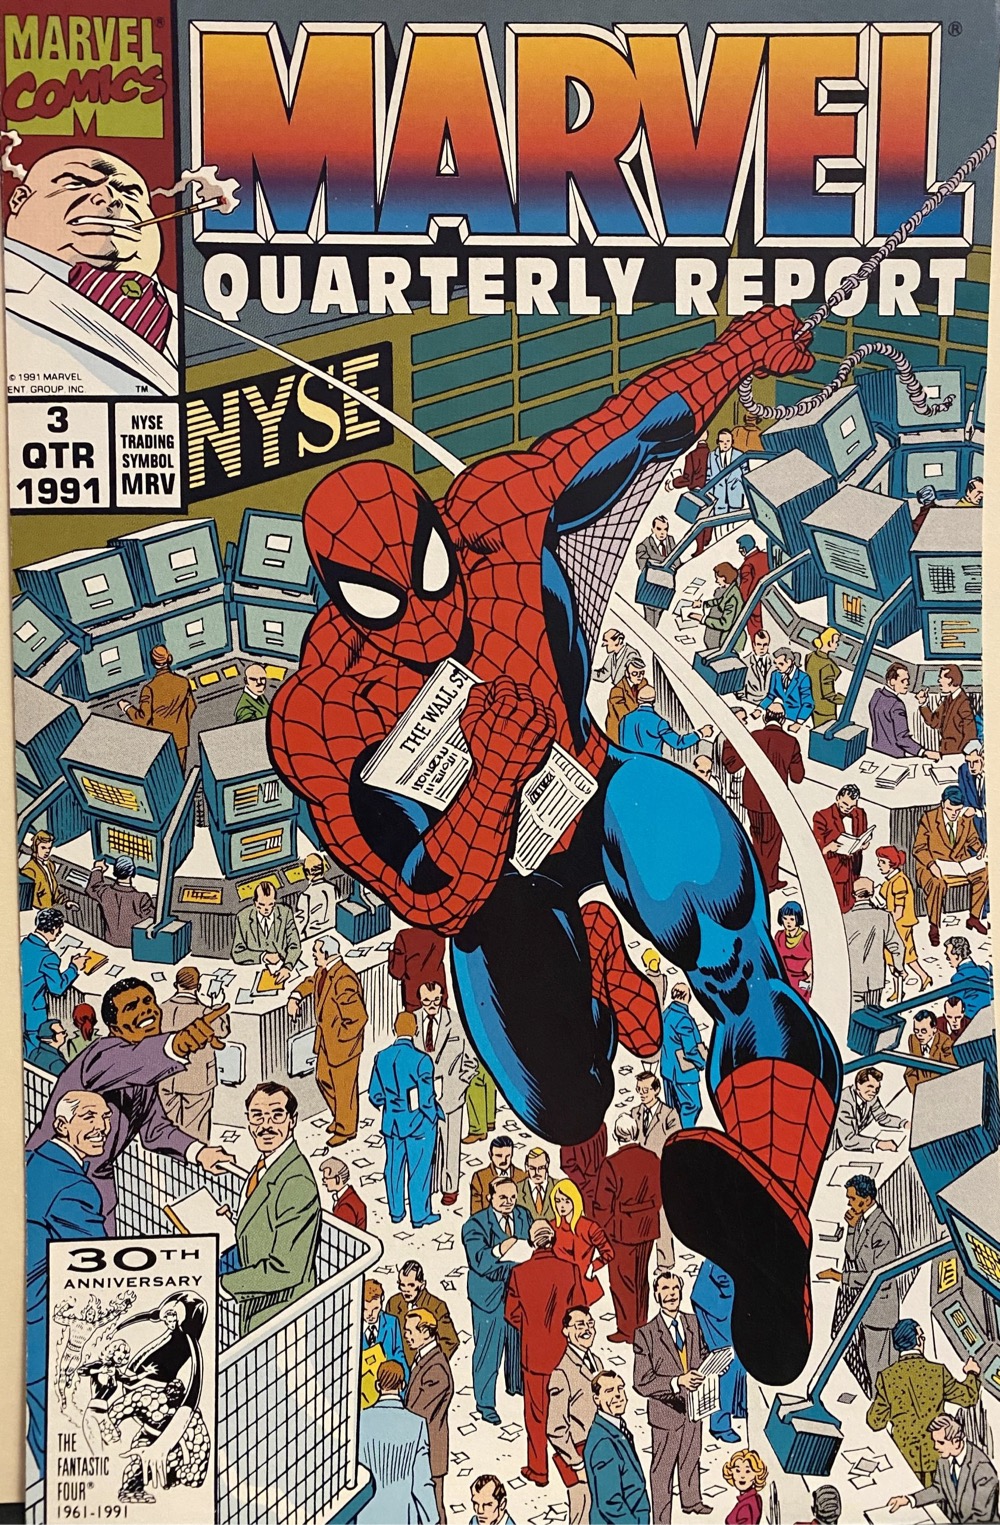 front cover of the Marvel Quarterly Report for the 3rd quarter of 1991